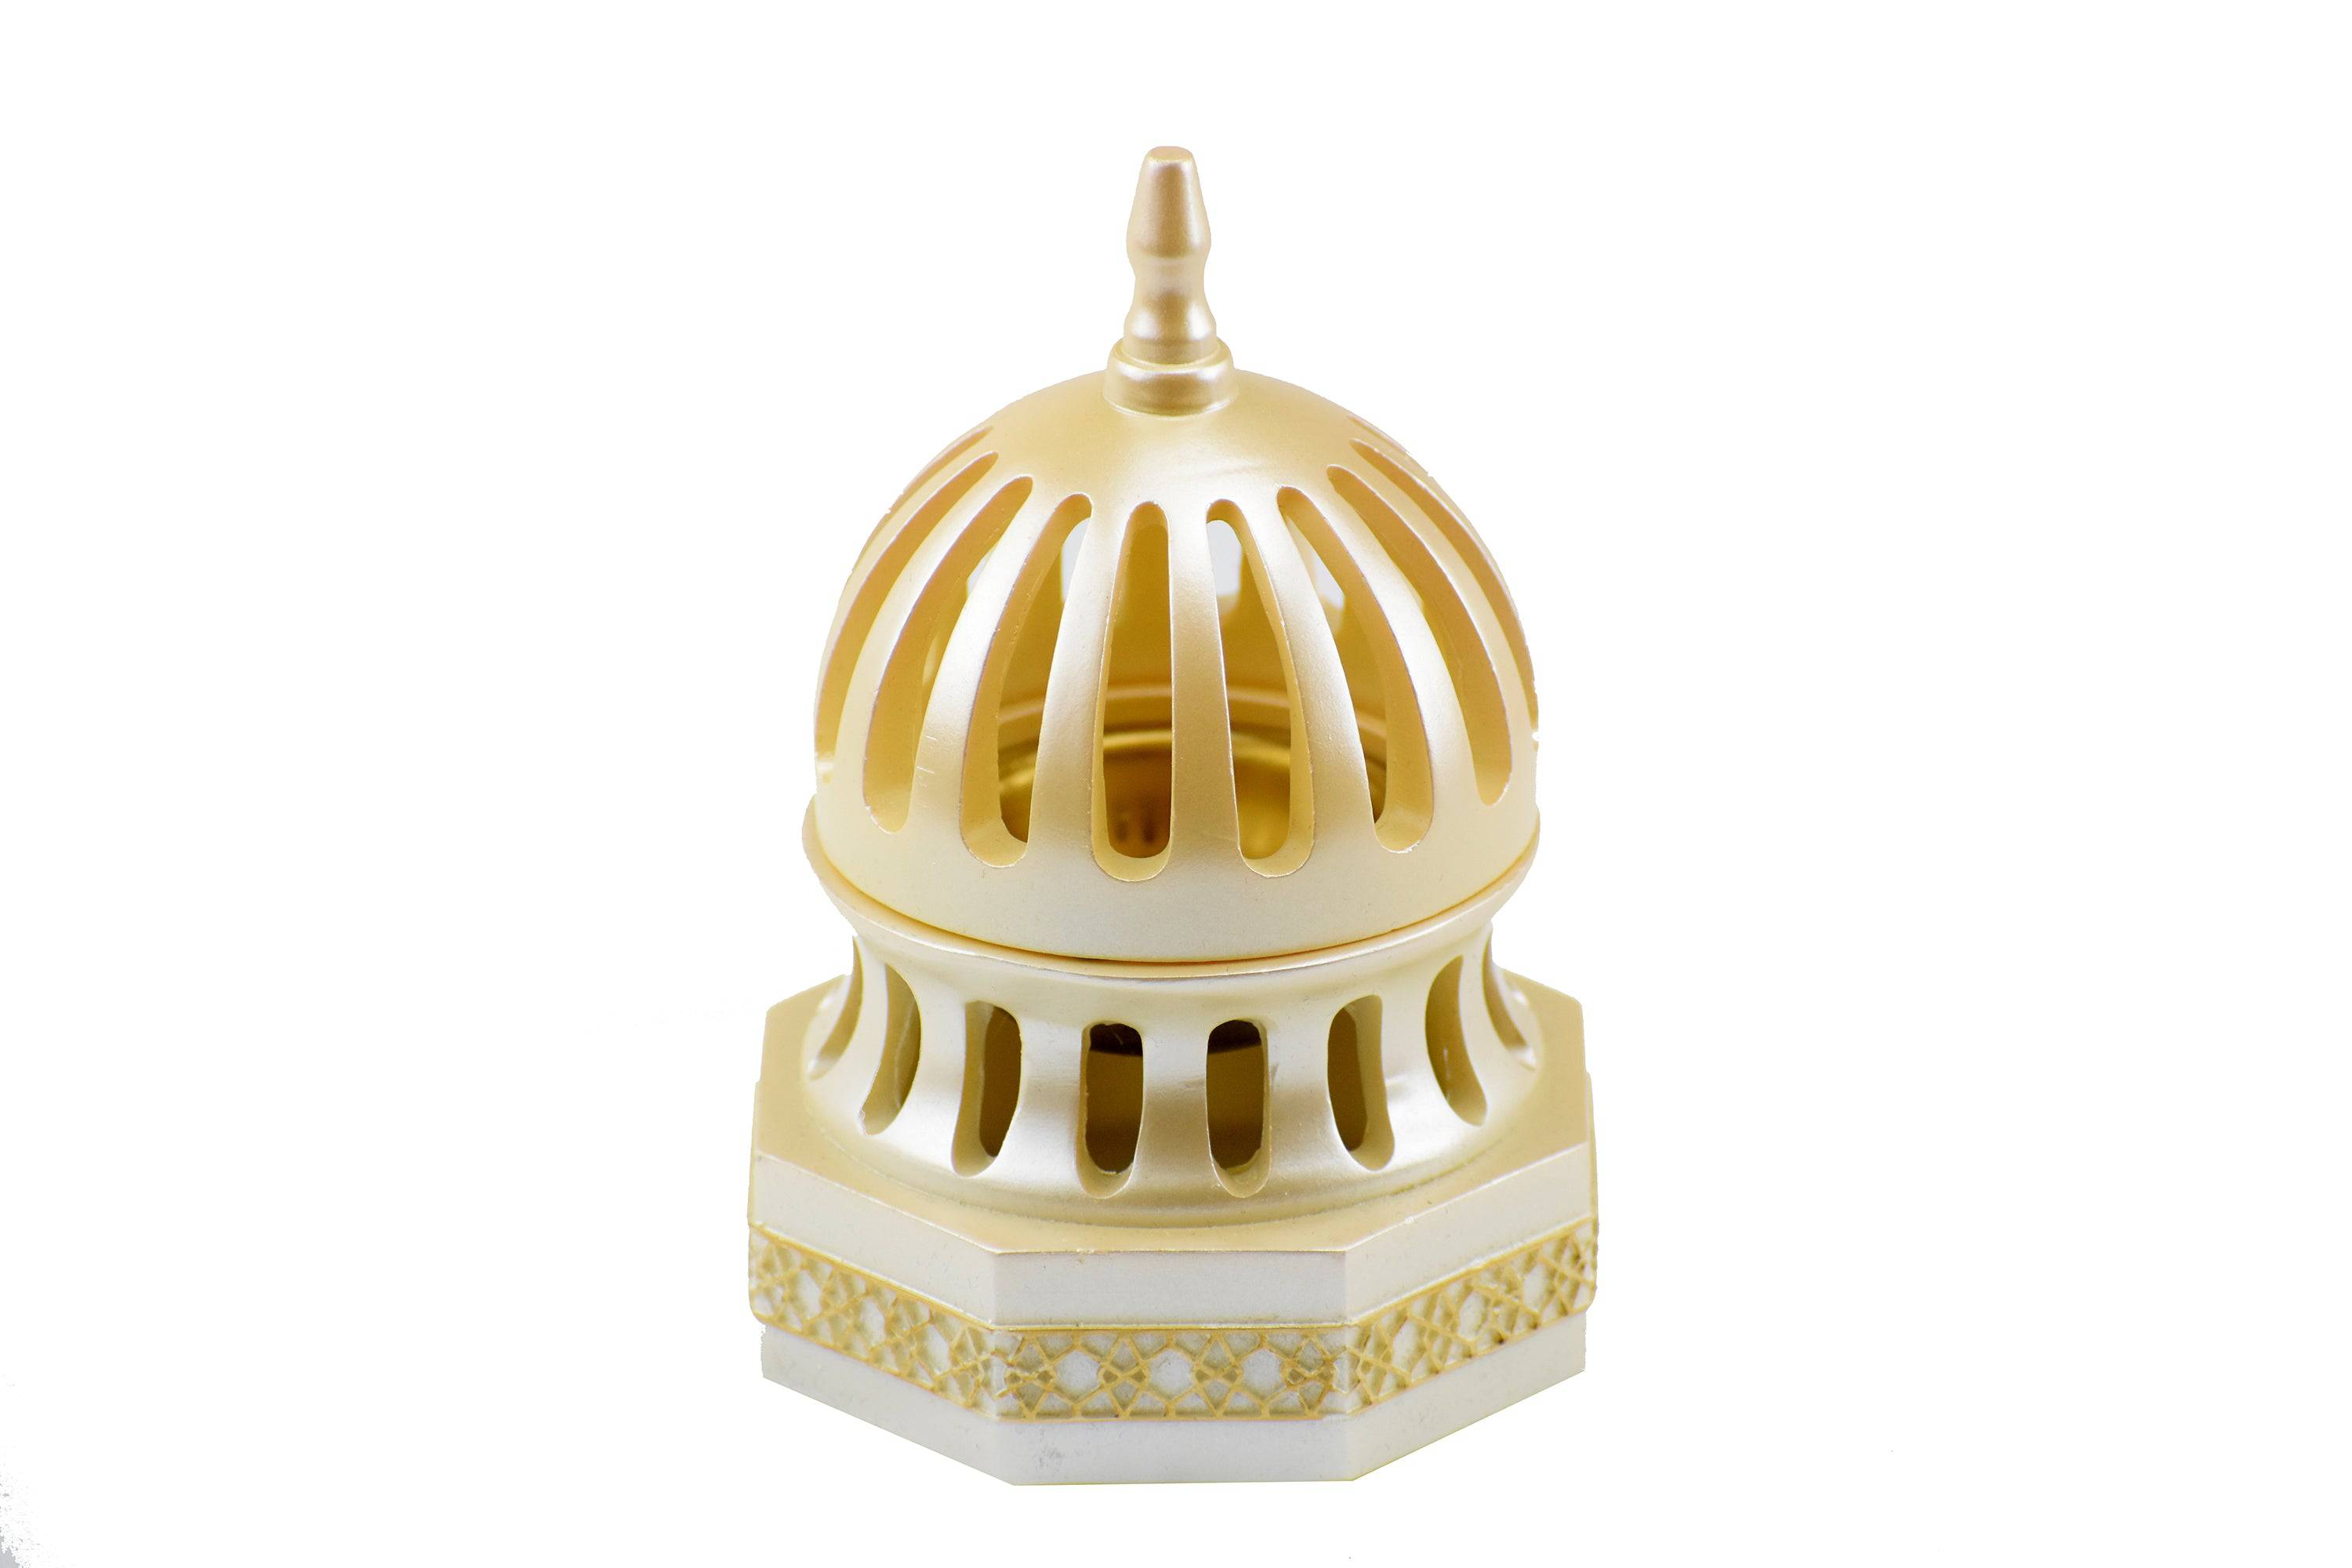 Classic Traditional Dome Style Closed Incense Bakhoor Burner - Beige - Intense oud